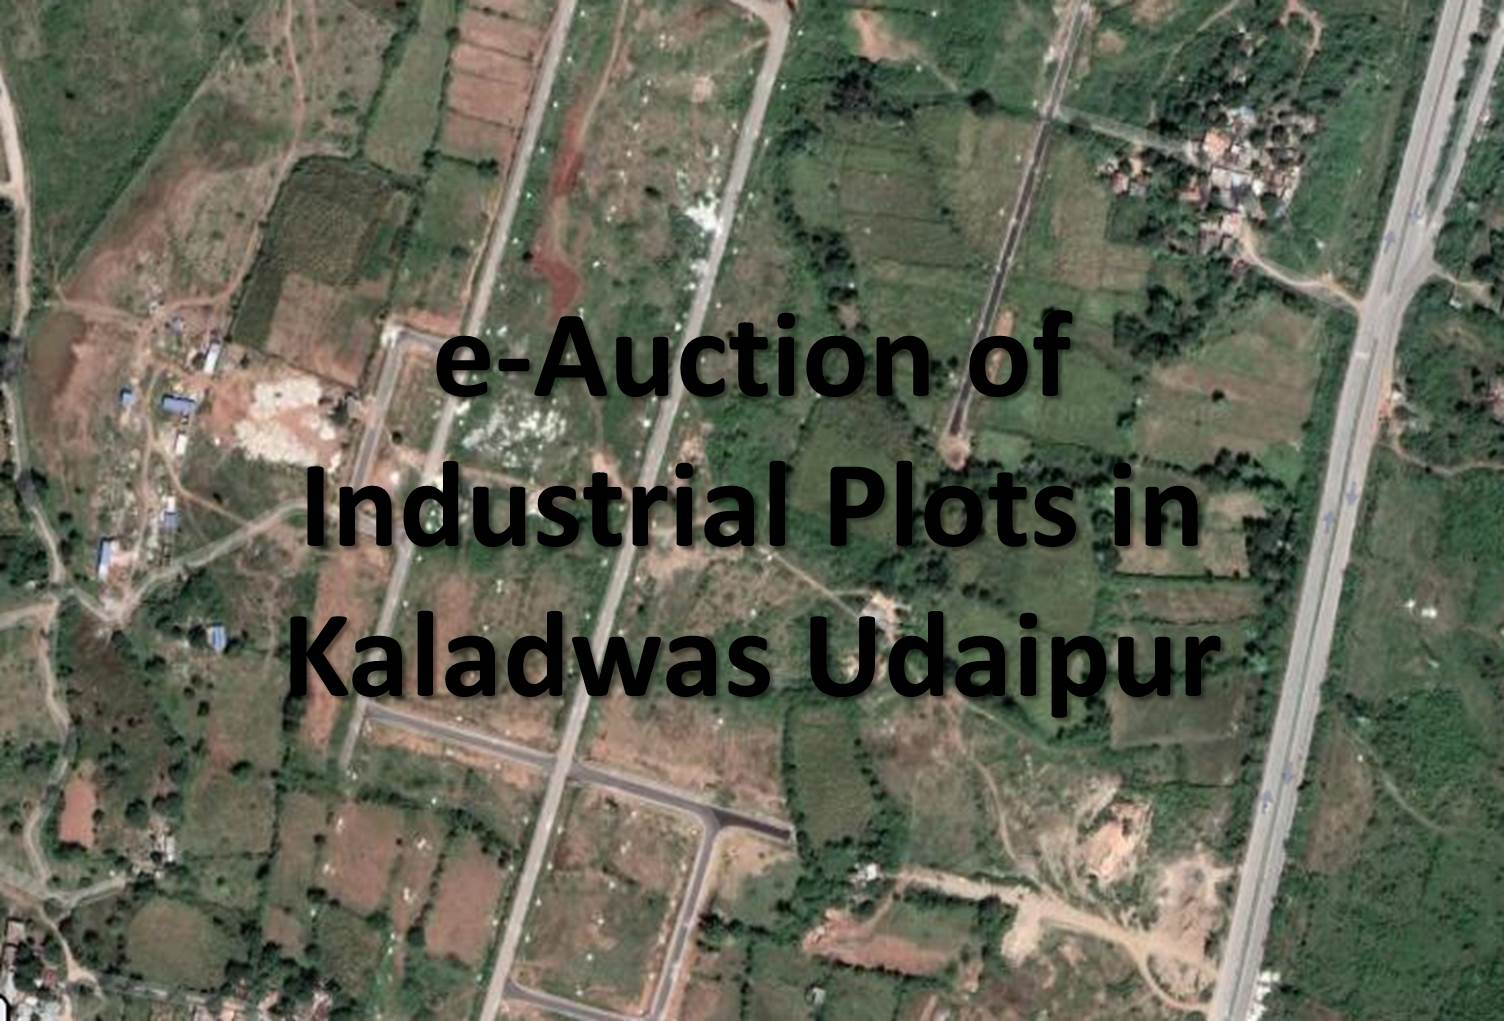 e auction of industrial plots in kaladwas udaipur auction of riico plots in udaipur riico auction in udaipur